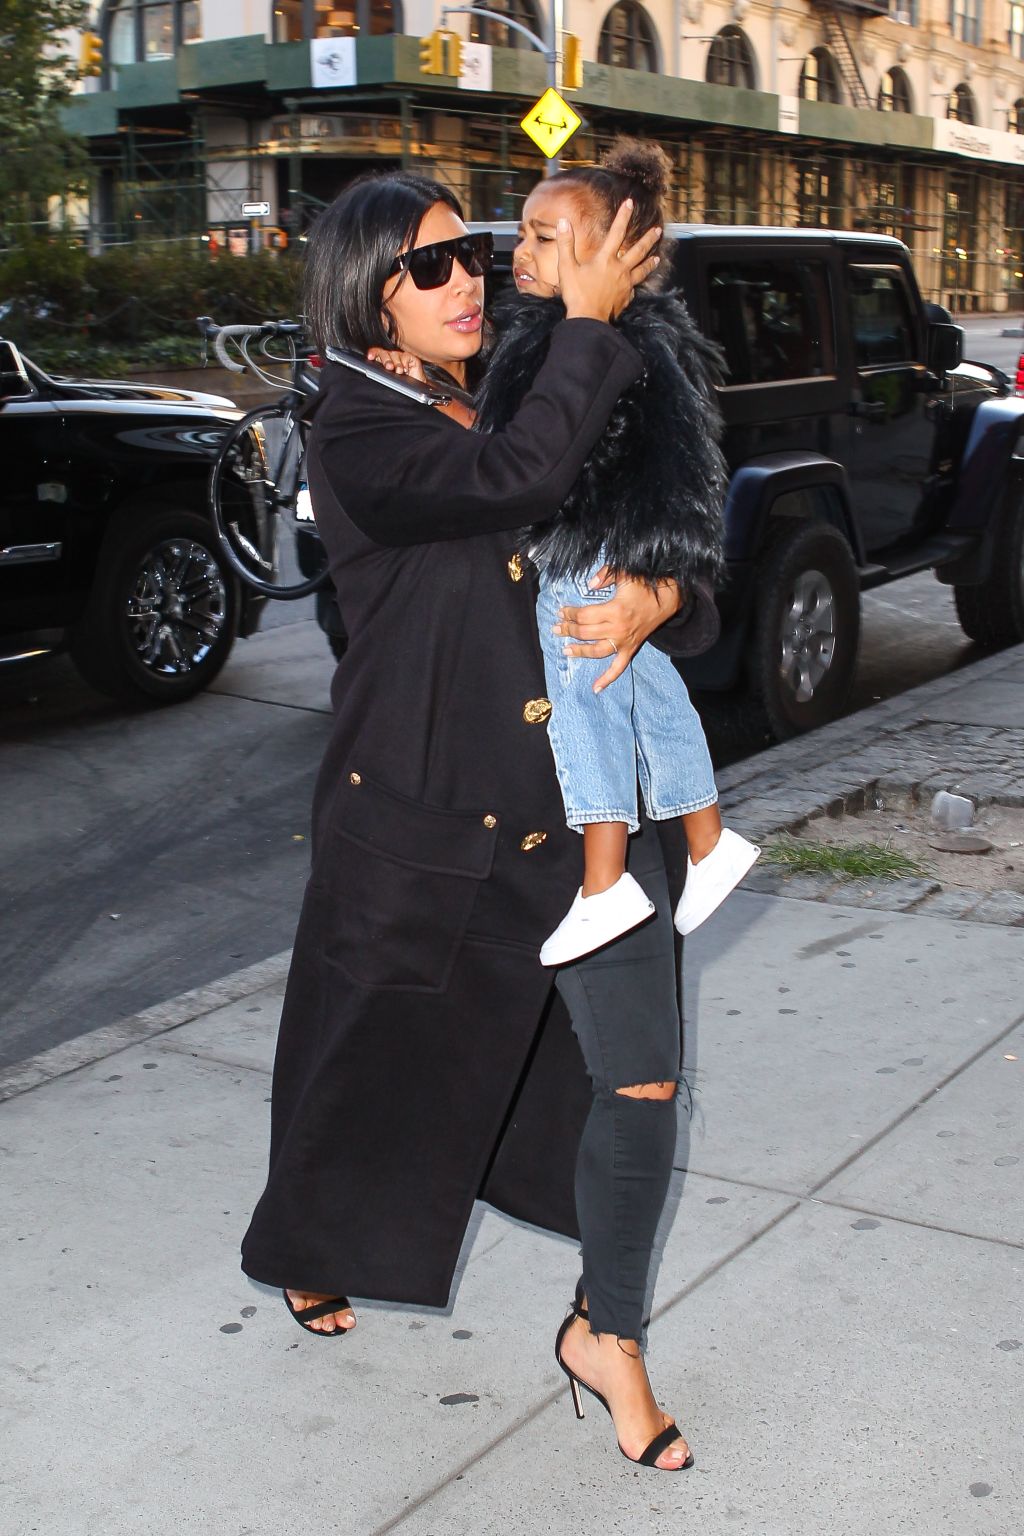 Kim Kardashian arrives in NYC at Kanye West's apartment with baby North